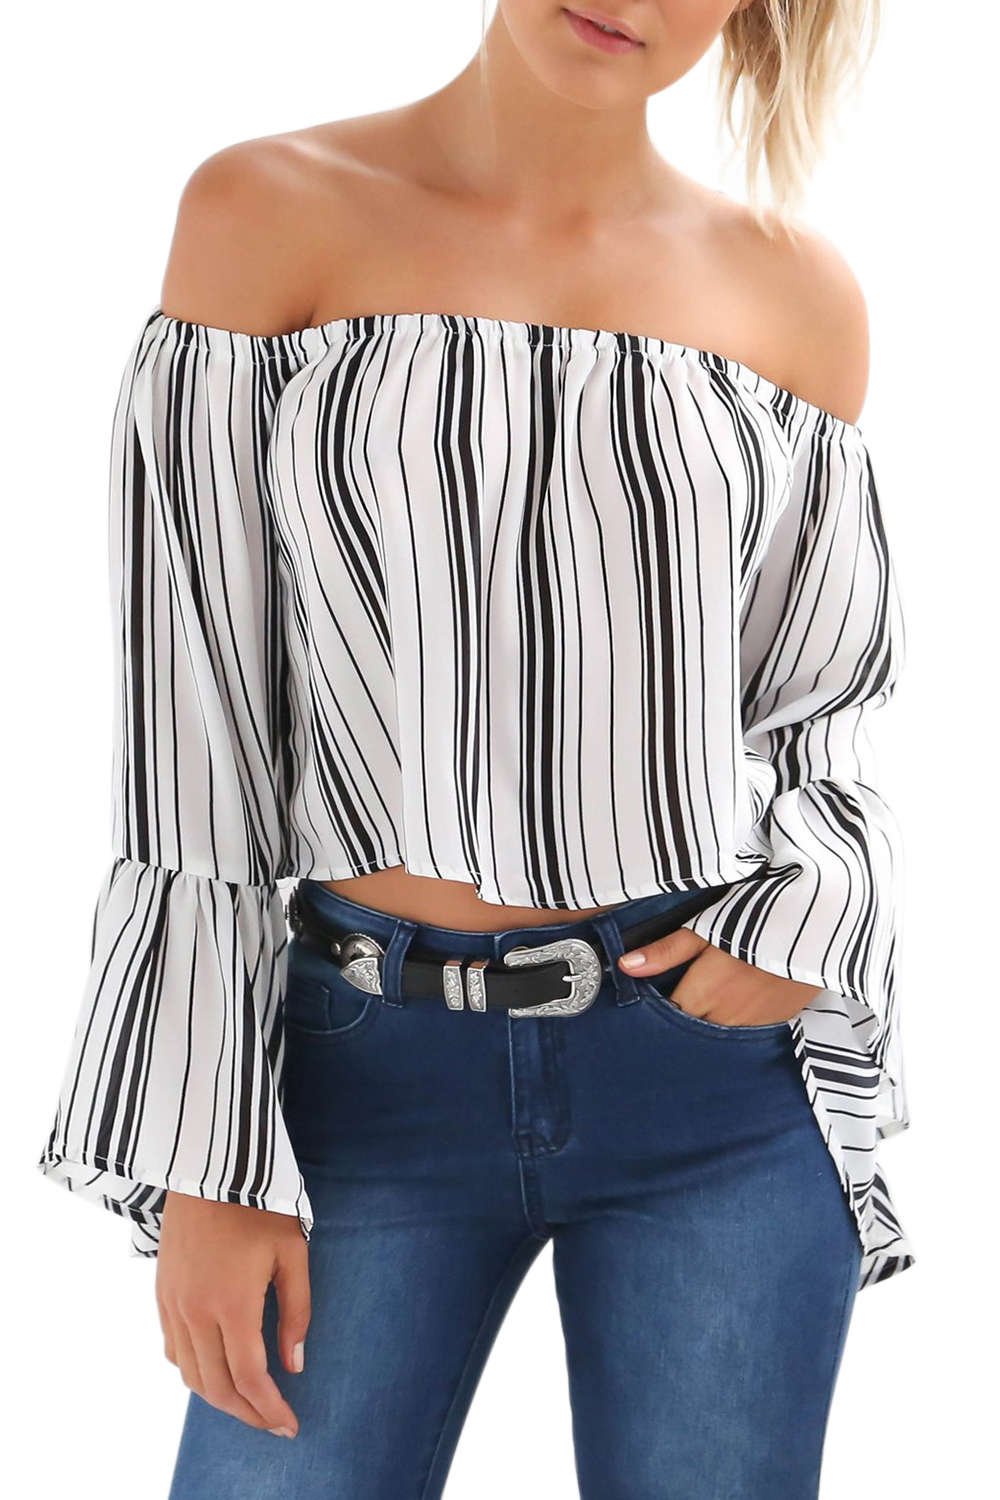 Iyasson Women's Off Shoulder Striped Casual Blouses